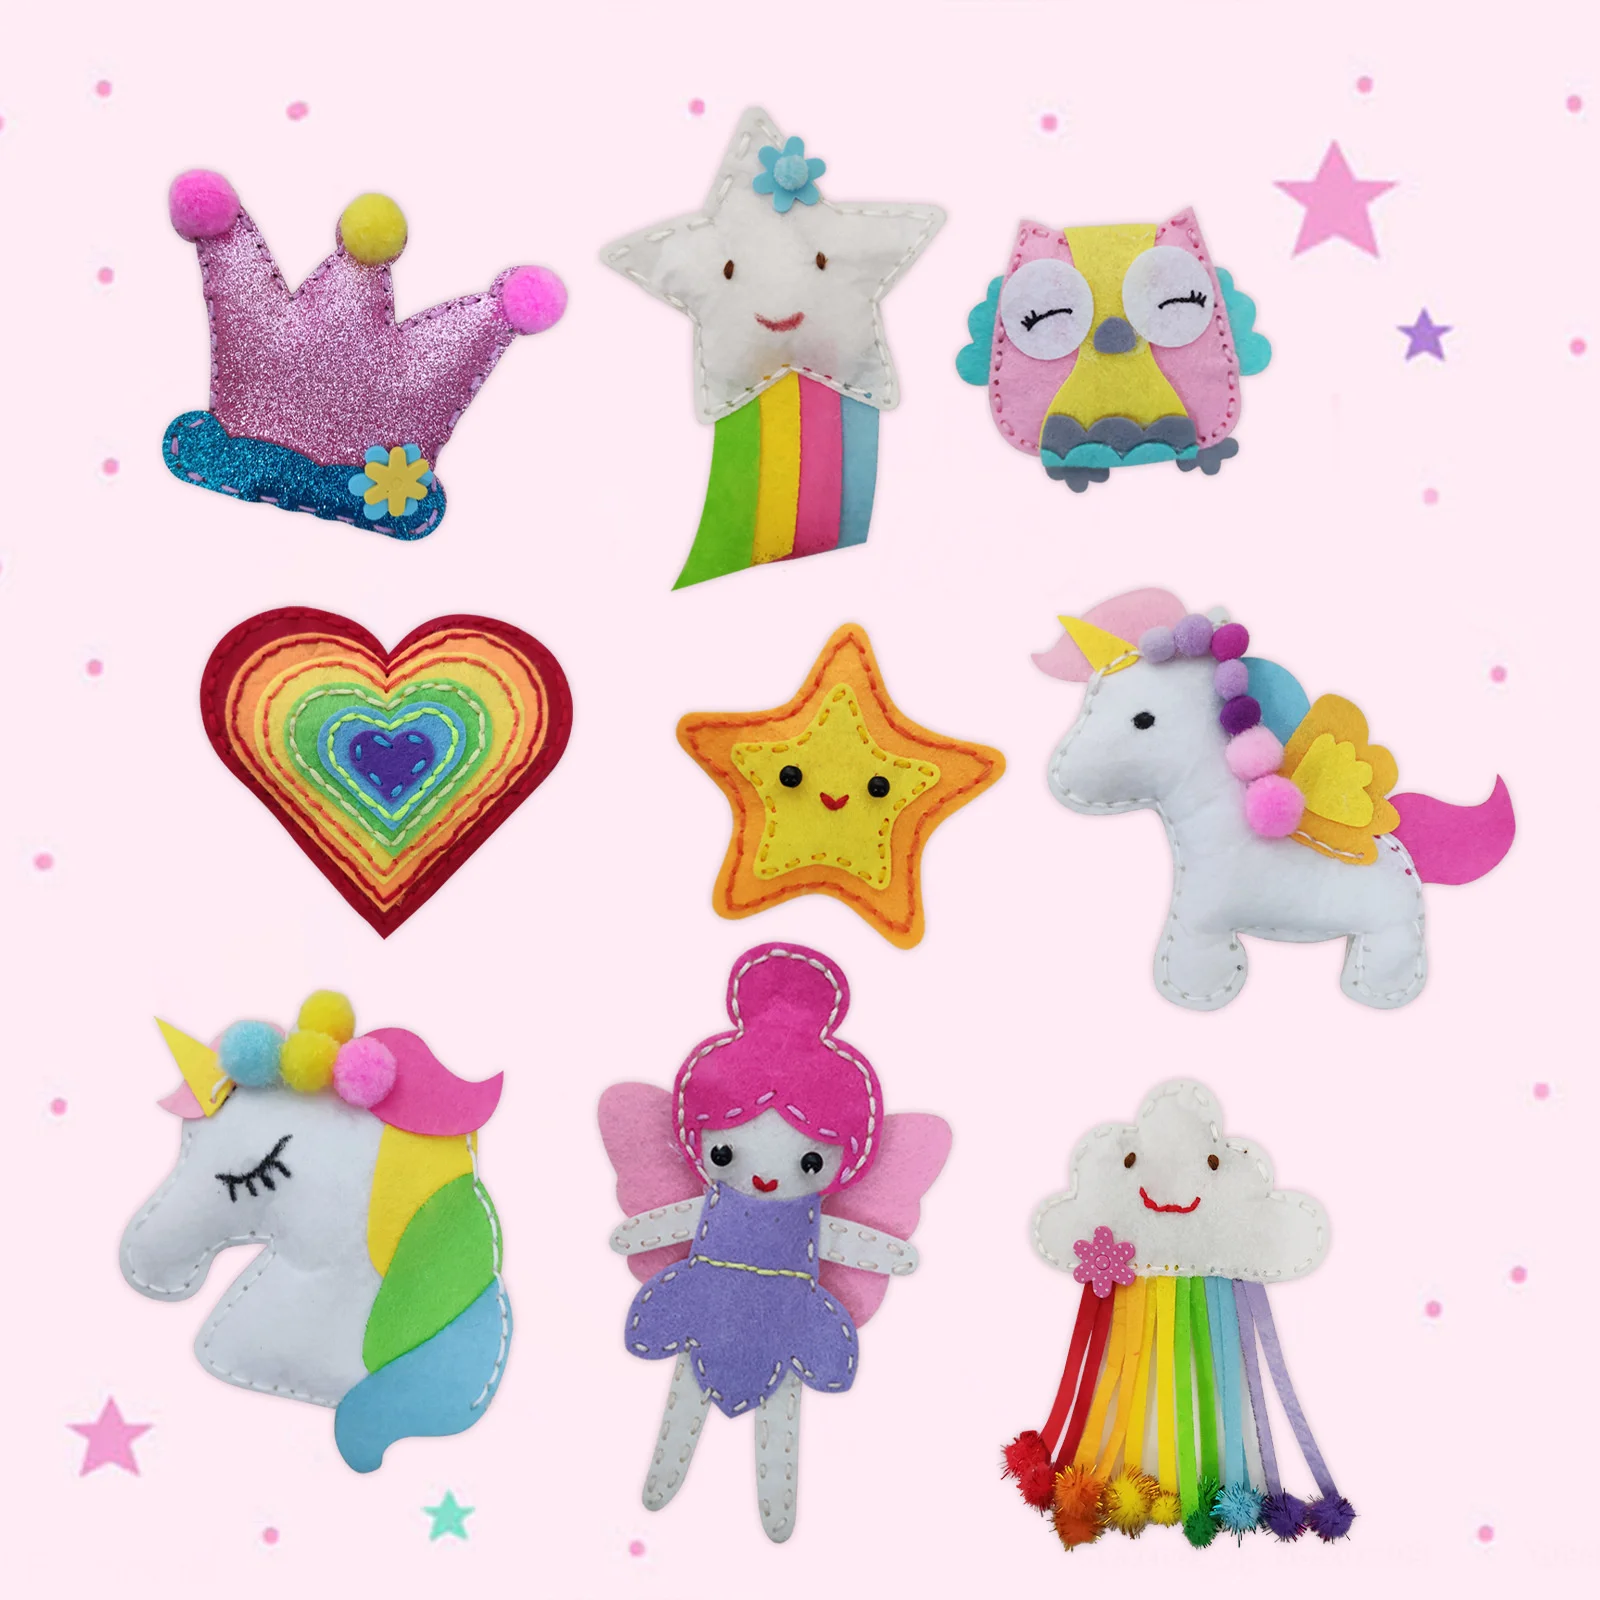 Rainbow Animals Craft Kit Forest Creatures DIY Sewing Felt Plush Animals For Kids Beginners Educational Sewing Set Kids Art Toy